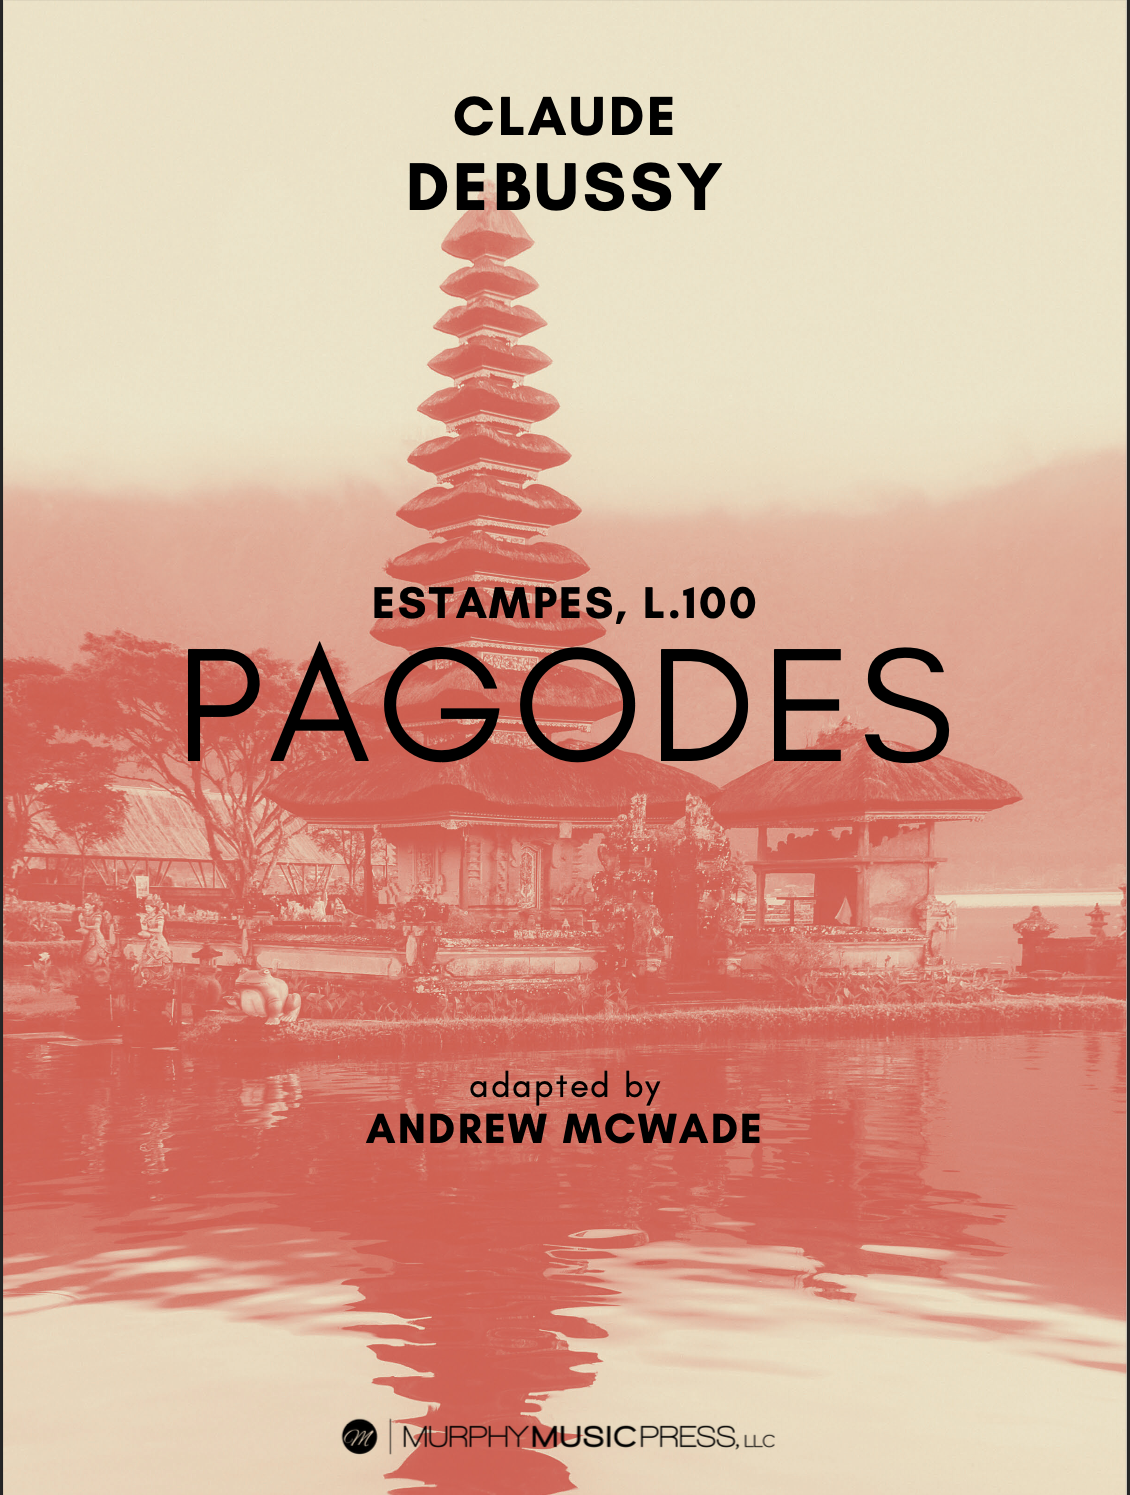 Pagodes (Score Only) by Claude Debussy adapted by Andrew McWade